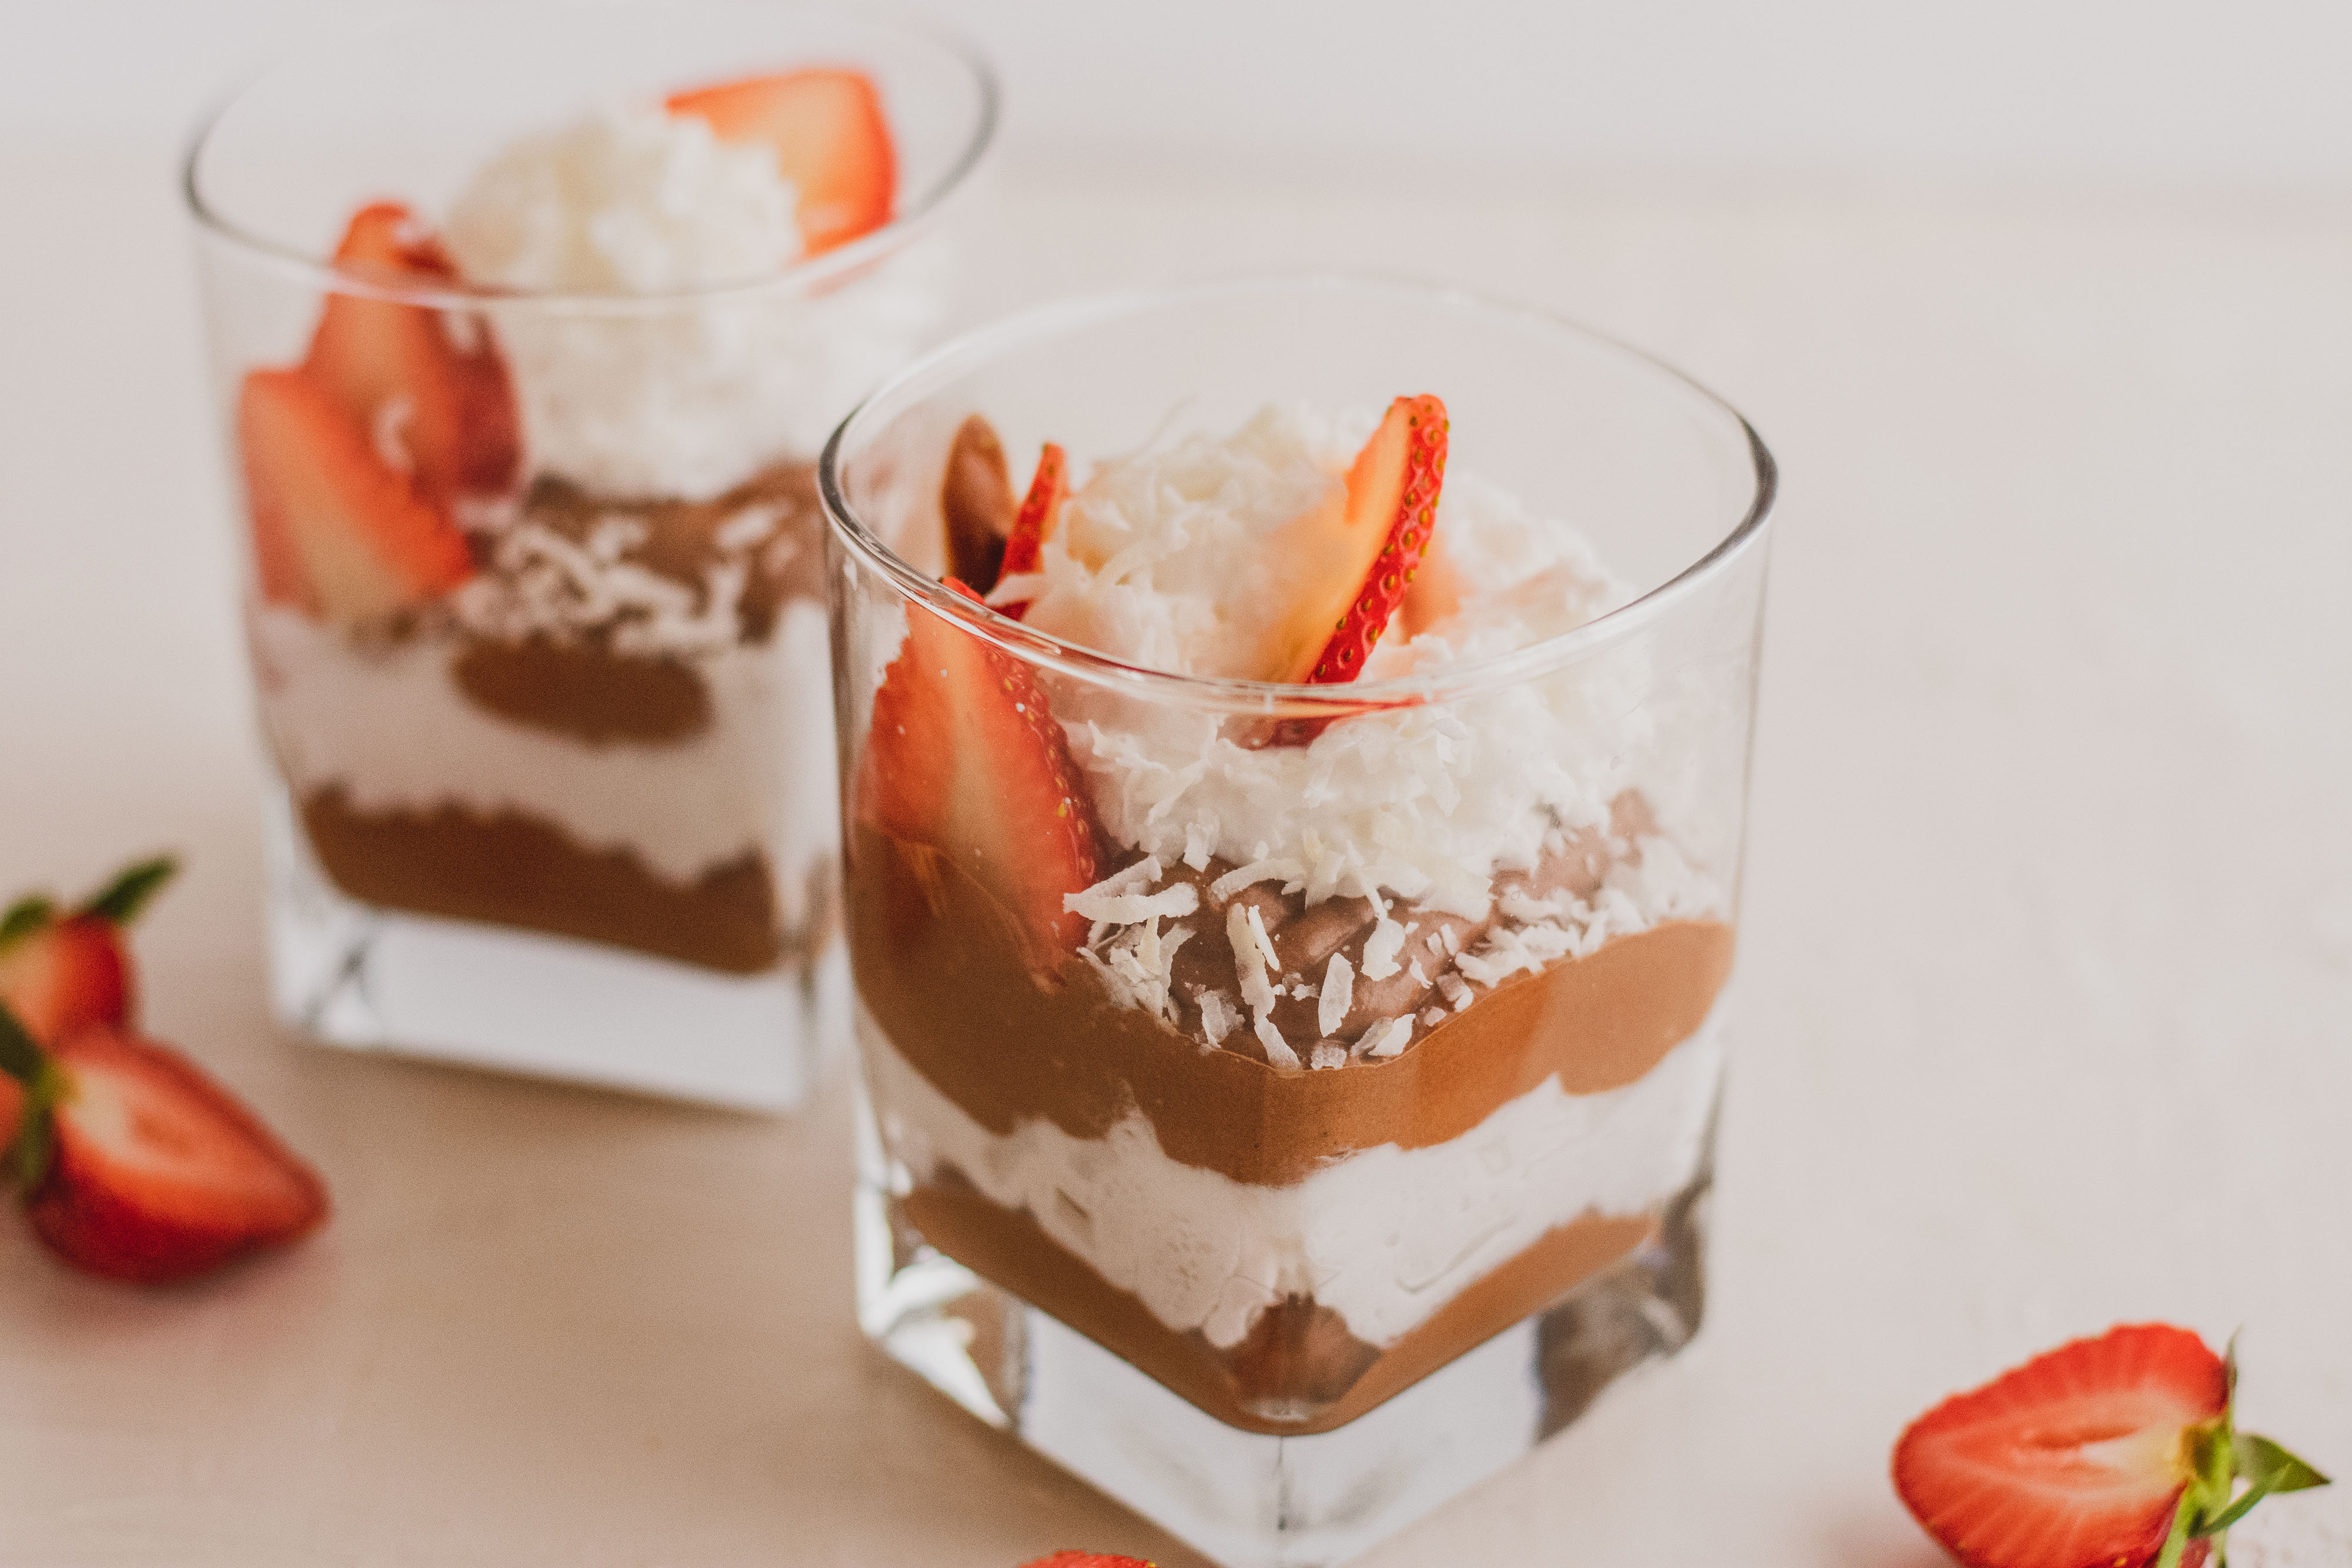 low carb Chocolate pudding with whipped cream topped with strawberries on a white surface